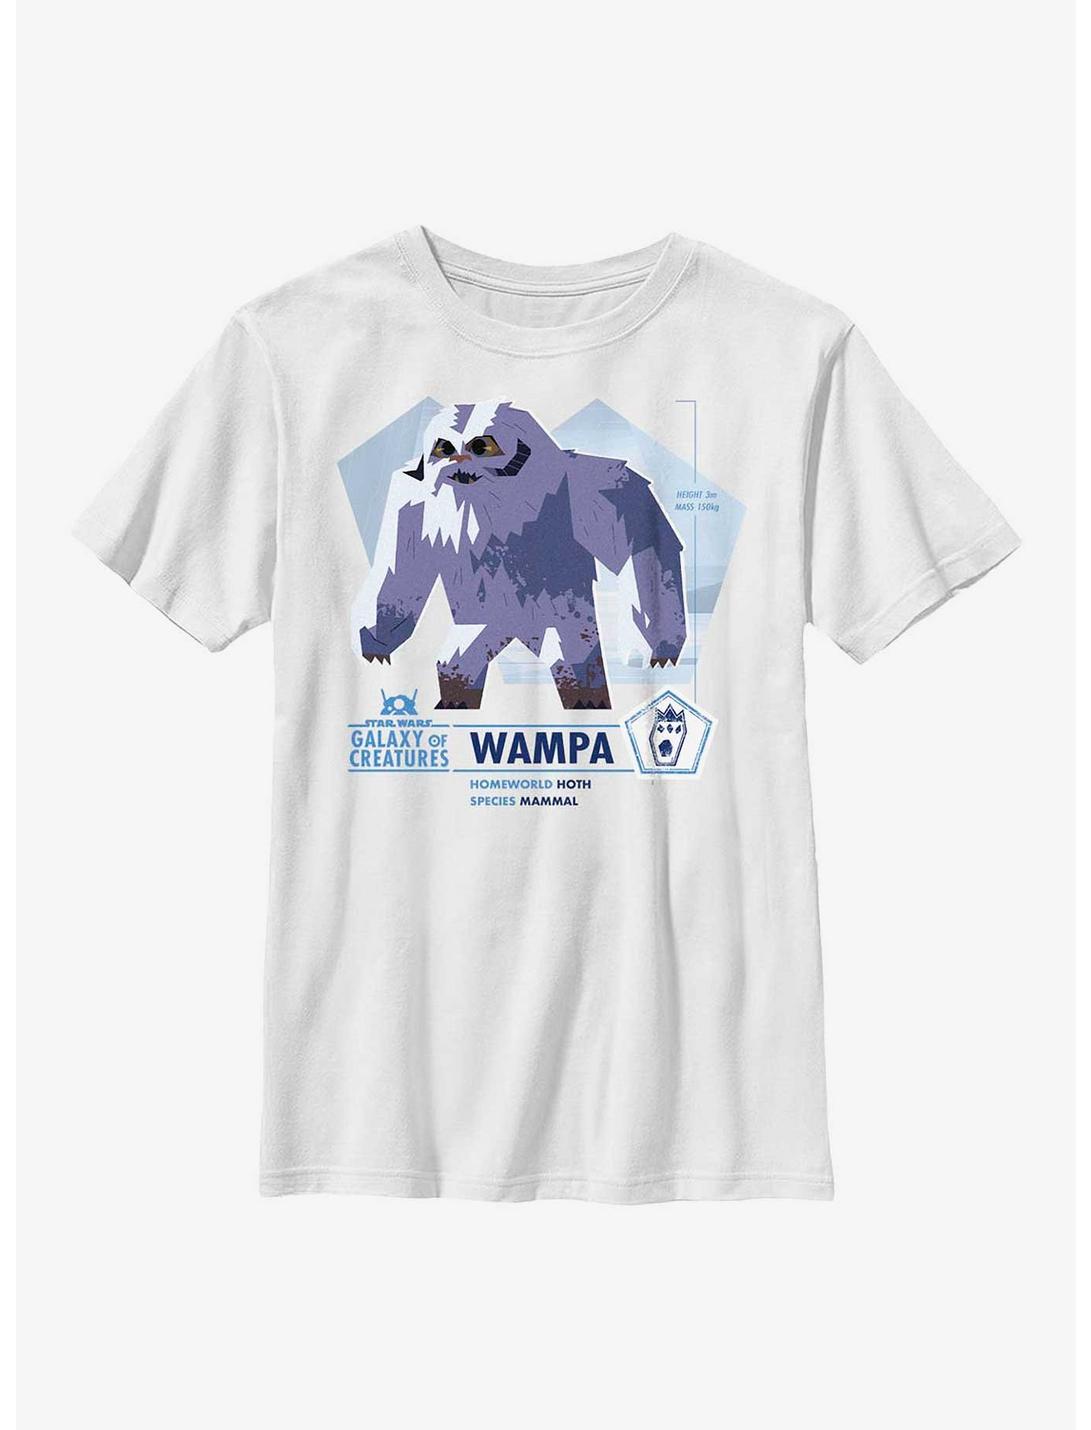 Star Wars Galaxy Of Creatures Wampa Species Youth T-Shirt, WHITE, hi-res